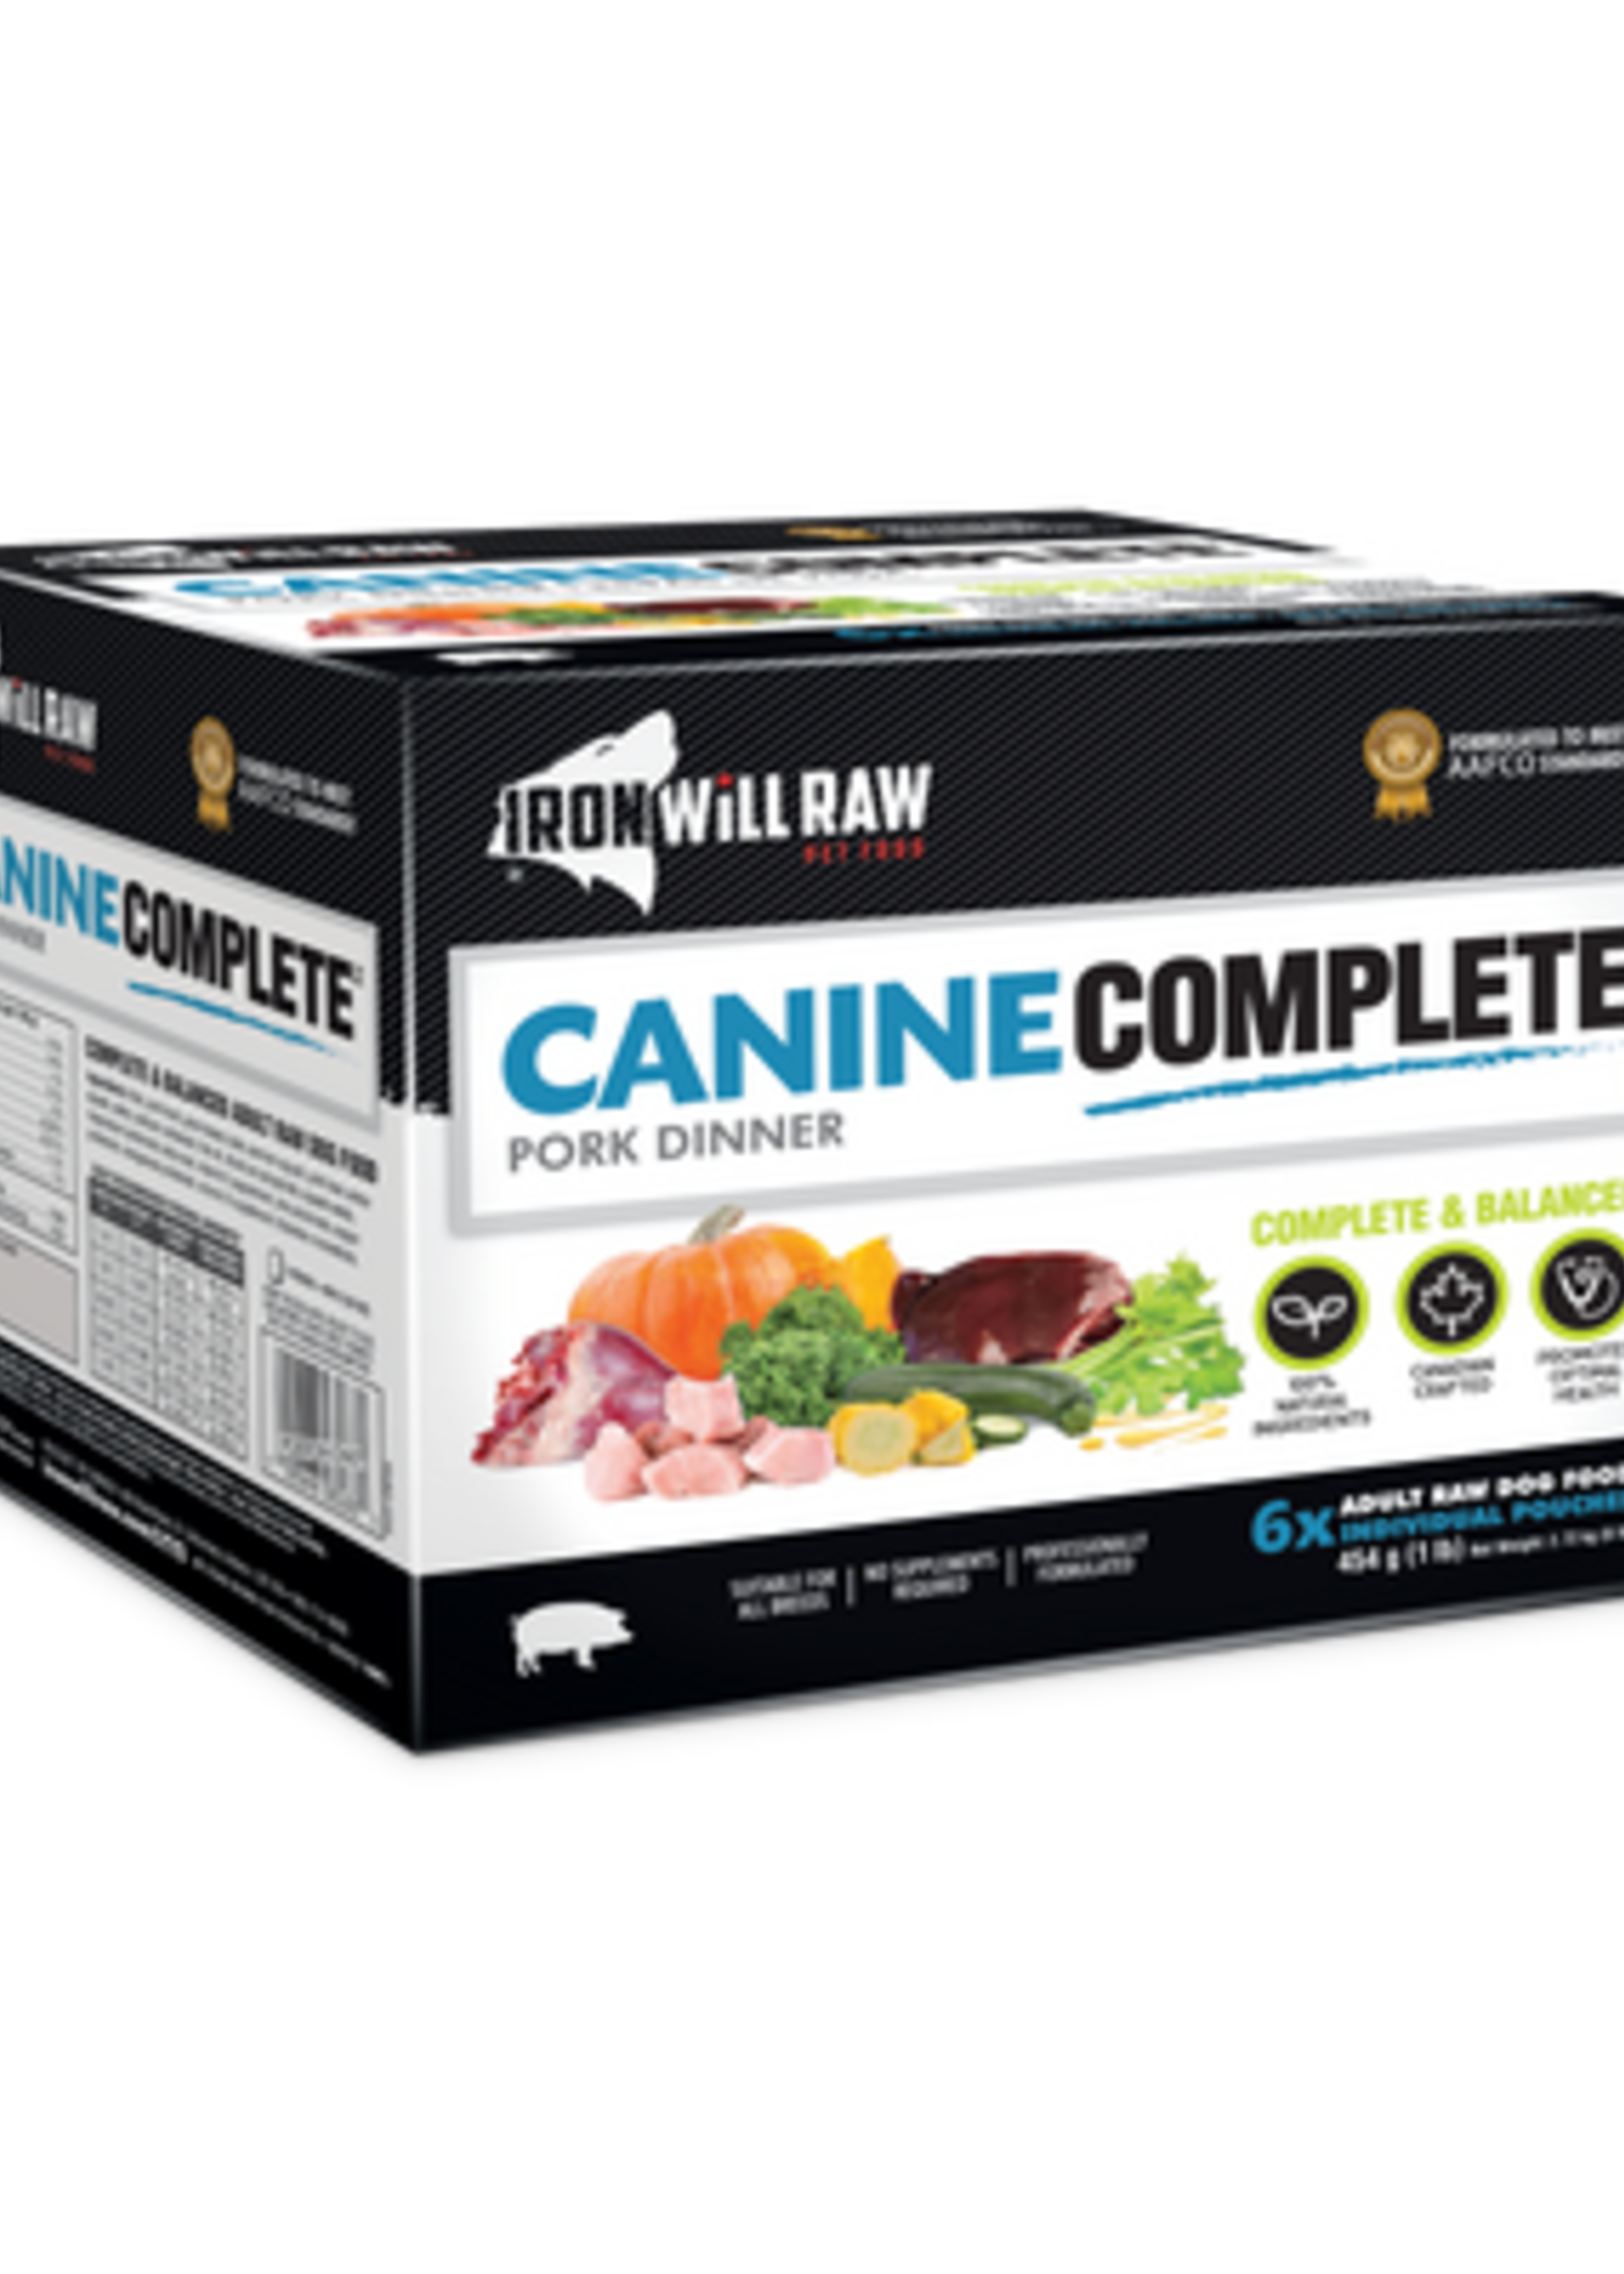 Iron Will Iron Will Raw Canine Complete Pork Dinner 1lb x 6